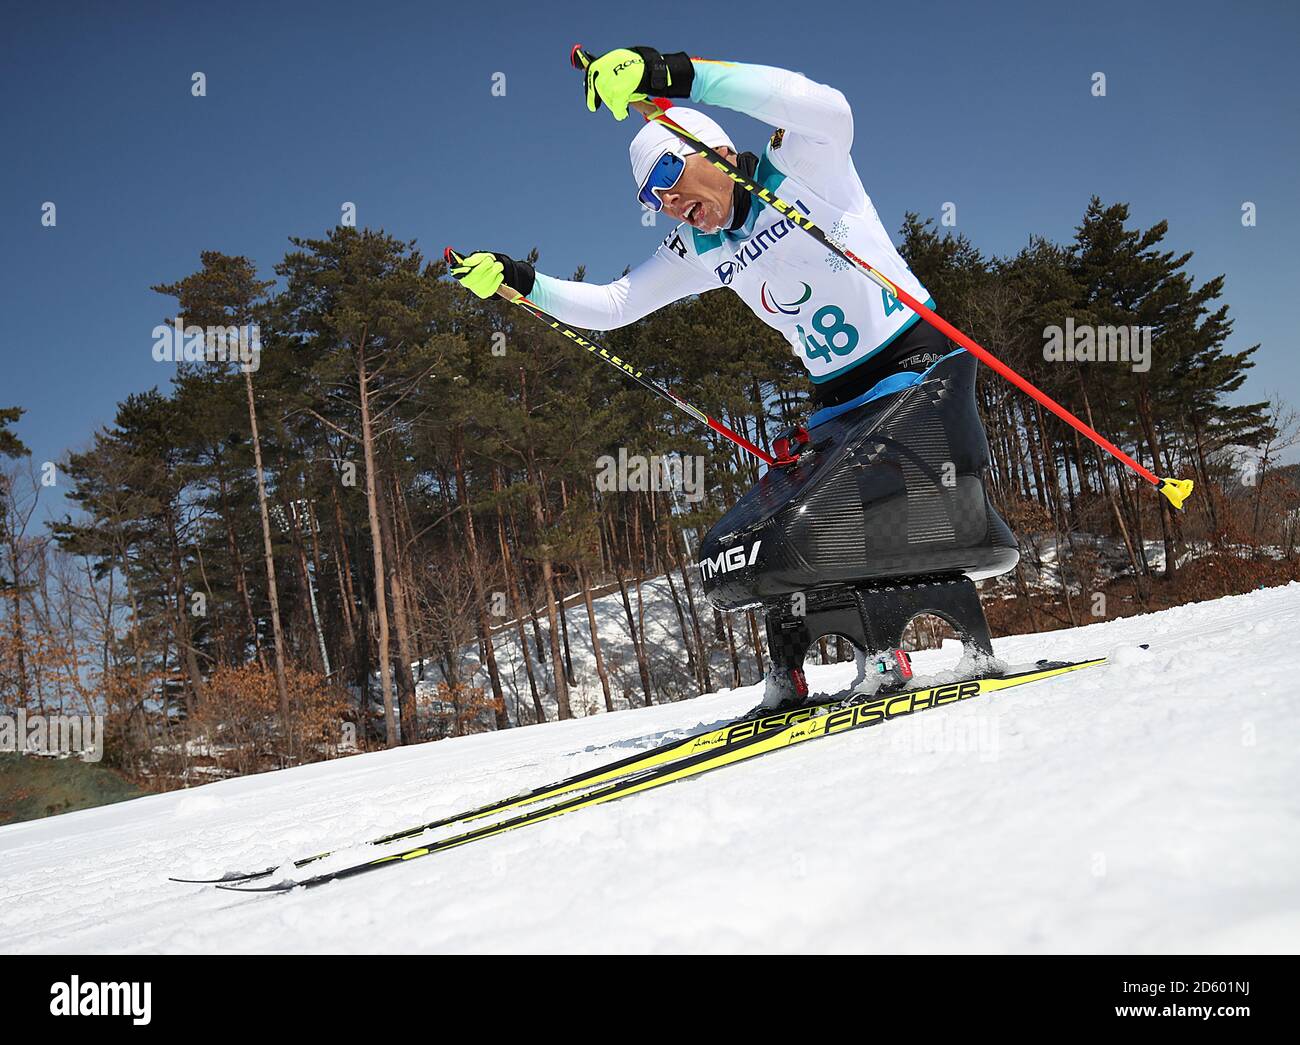 Germany's Andrea Eskau in the Women's 12km Cross Country Skiing, sitting during day two of the PyeongChang 2018 Winter Paralympics in South Korea Stock Photo